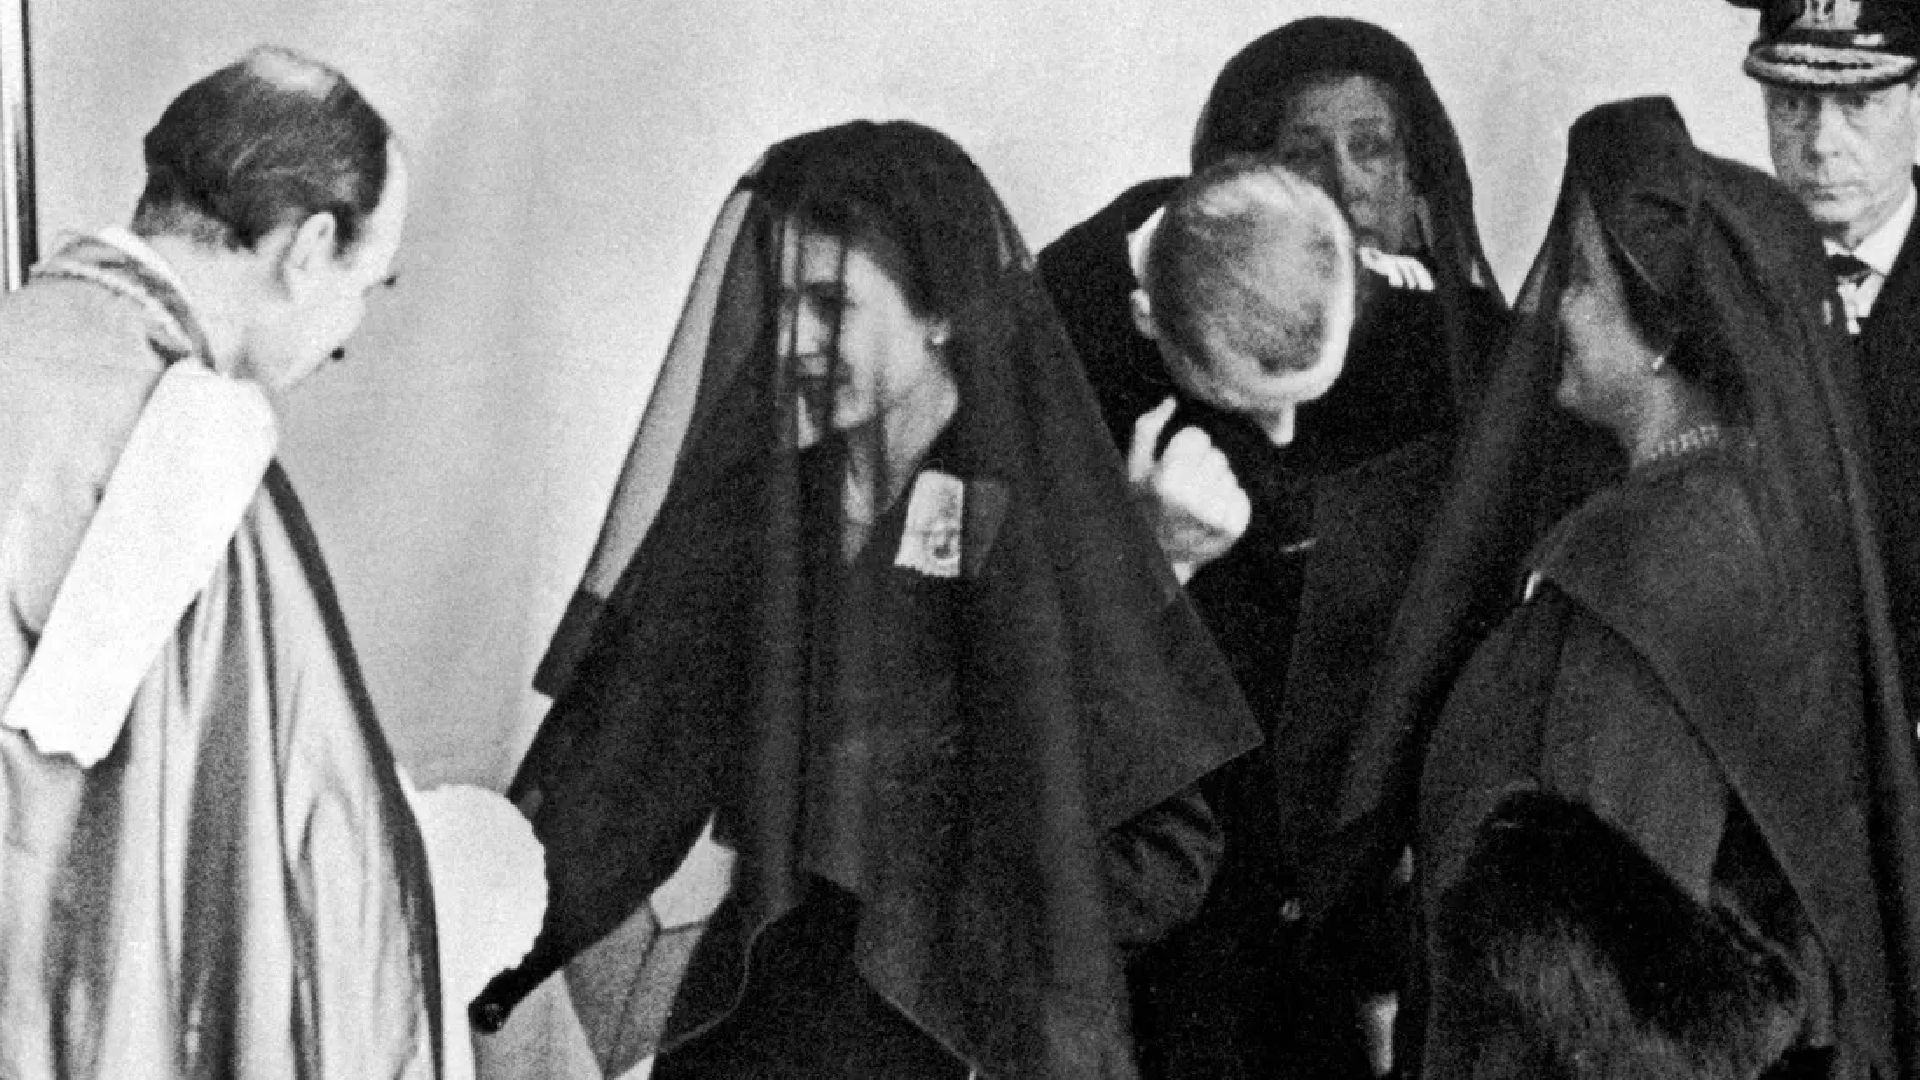 <p>                     Princess Elizabeth became Queen Elizabeth II when King George VI died in February 1952. The King’s coffin lay in Westminster Hall where 305,806 people filed past to pay their respects ahead of the funeral service on February 15. Wearing a black veil and dress, Queen Elizabeth accompanied the procession to St George’s Chapel and this is said to have marked the first time a funeral procession for a British monarch was televised. Reflecting on the sudden loss of her father, his funeral was a deeply moving moment for Queen Elizabeth as she prepared to follow in his footsteps.                   </p>